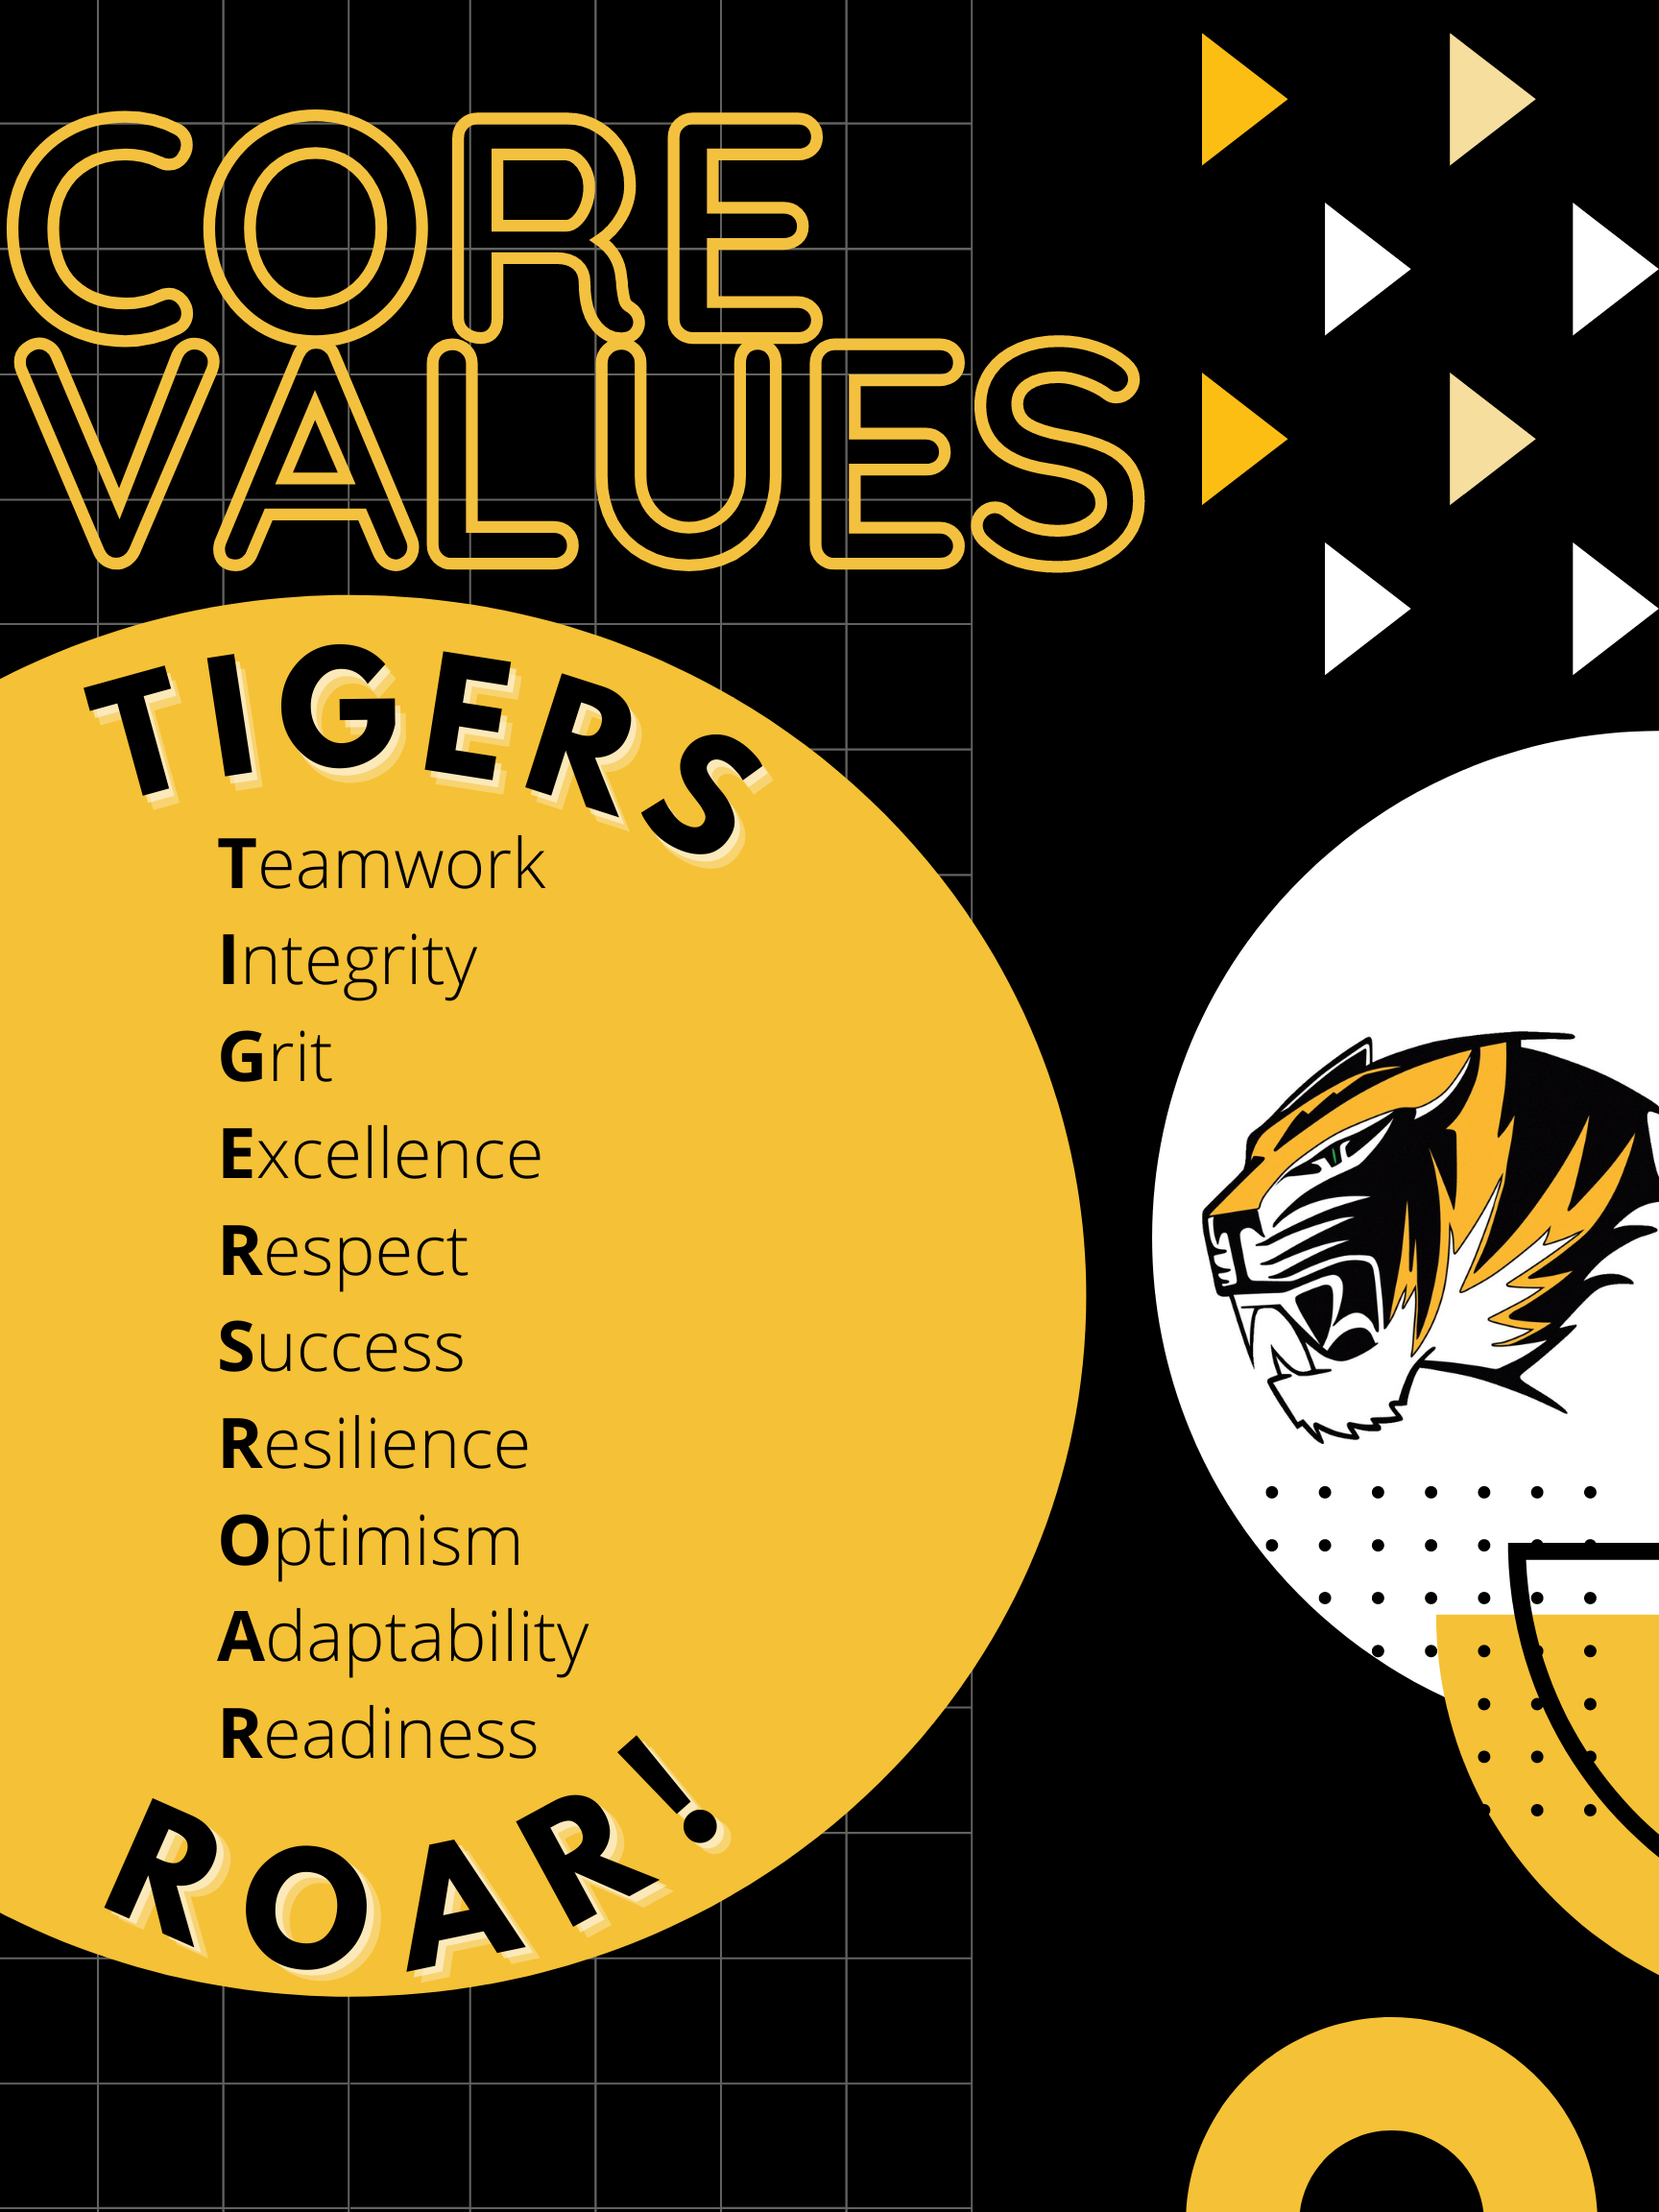 CORE VALUES: TIGERS ROAR- Teamwork, Integrity, Grit, Excellence, Respect, Success, Resilience, Optimism, Adaptability, Readiness